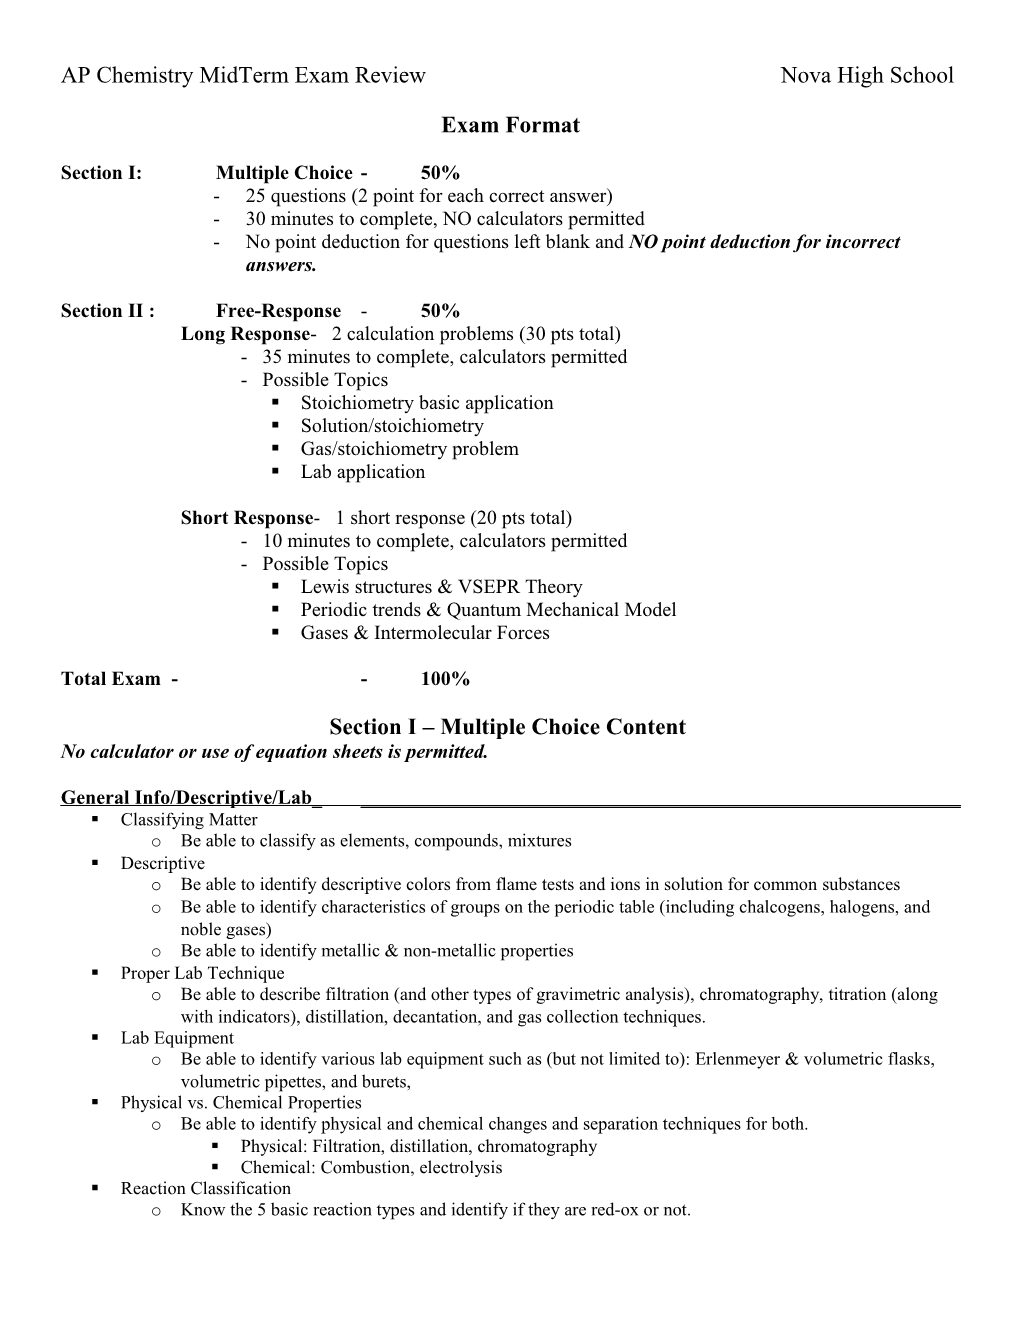 Chemistry Honors Mid-Term Exam Review Sheet